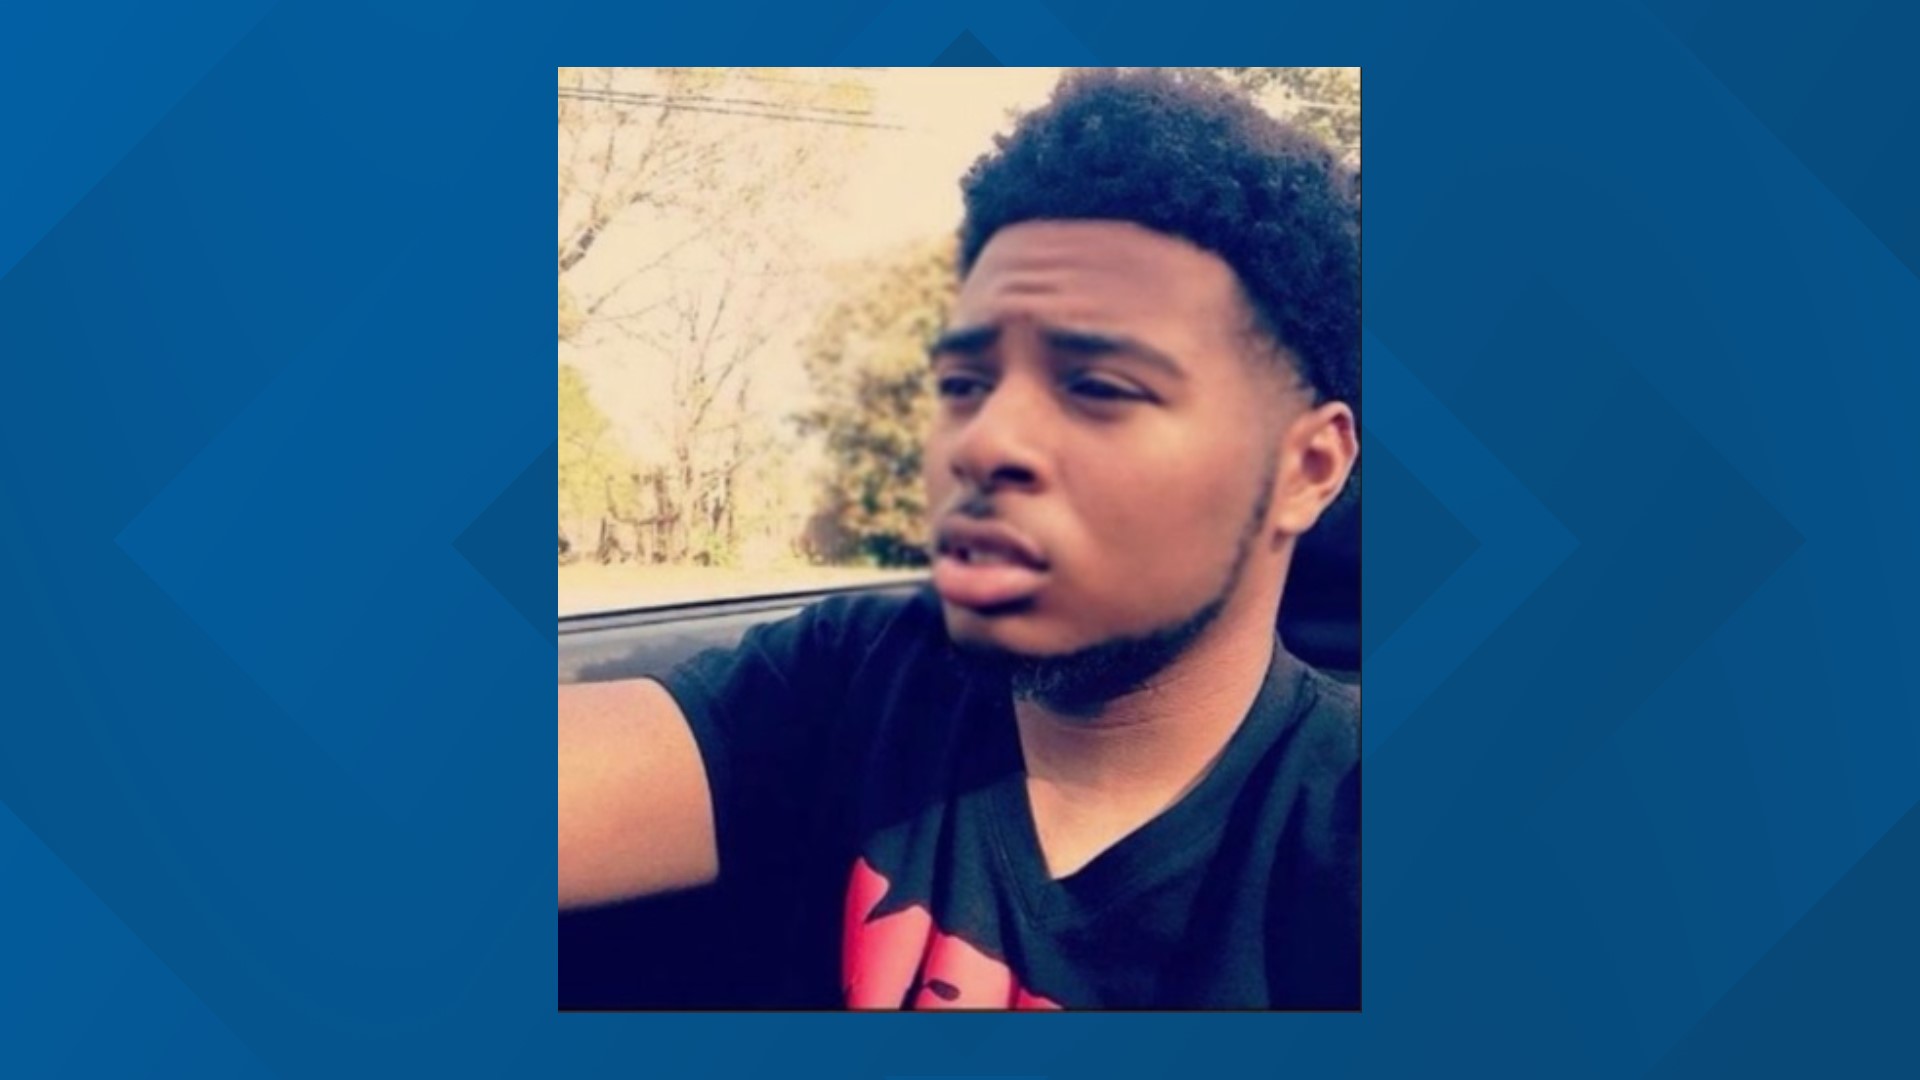 Charges have been dropped against De'Andre Brown and two others have been indicted in the 2020 July Fourth weekend shooting.